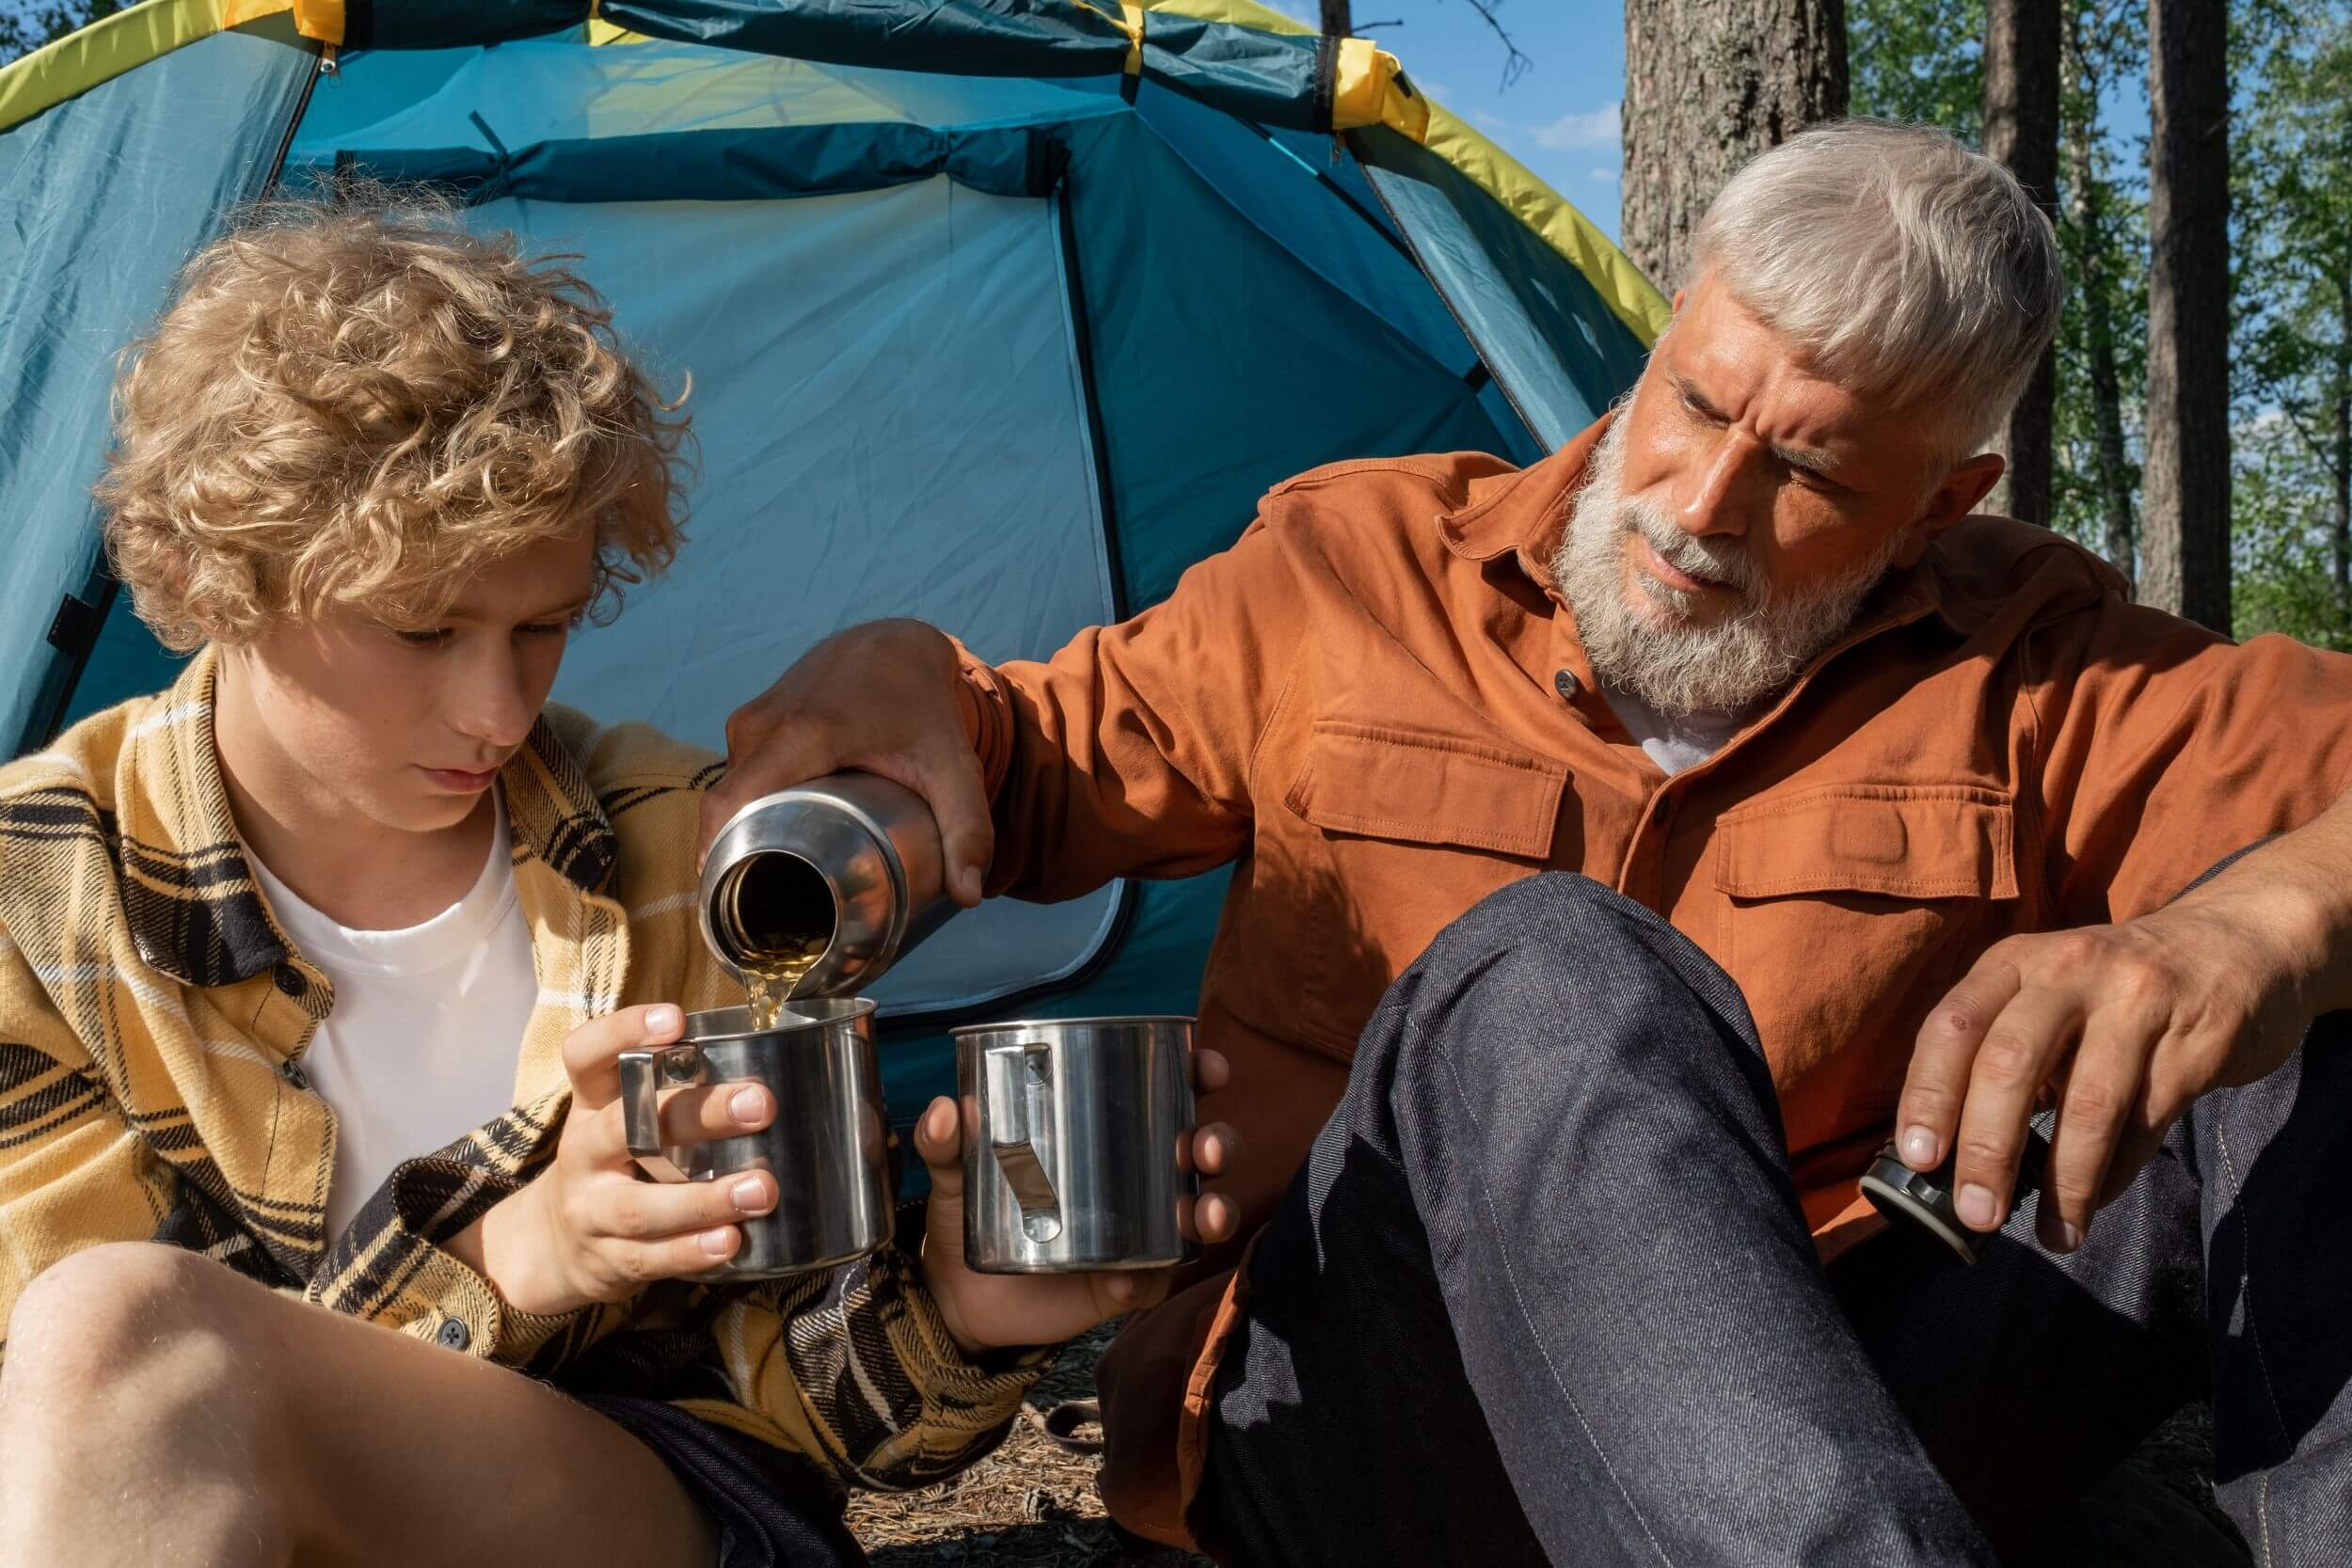 Grandfather pours grandson a cup of tea outside camping tent.